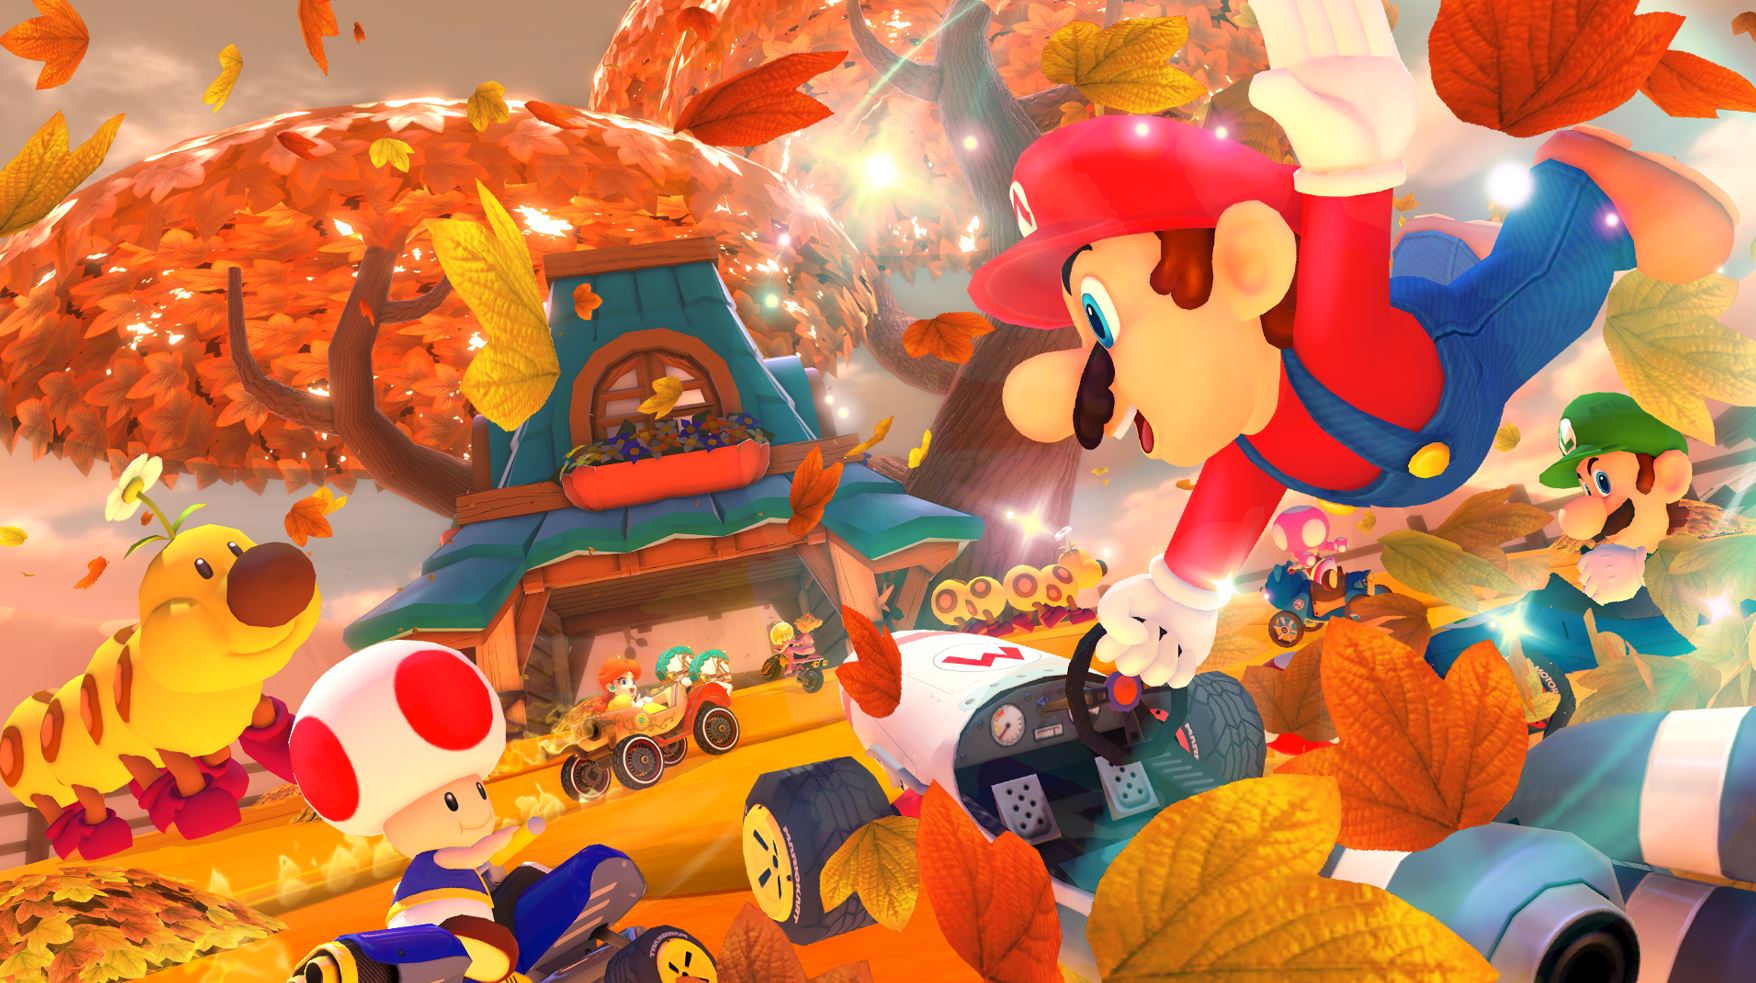 Mario Kart 8 Deluxe’s next DLC drop adds some of the series’
best courses